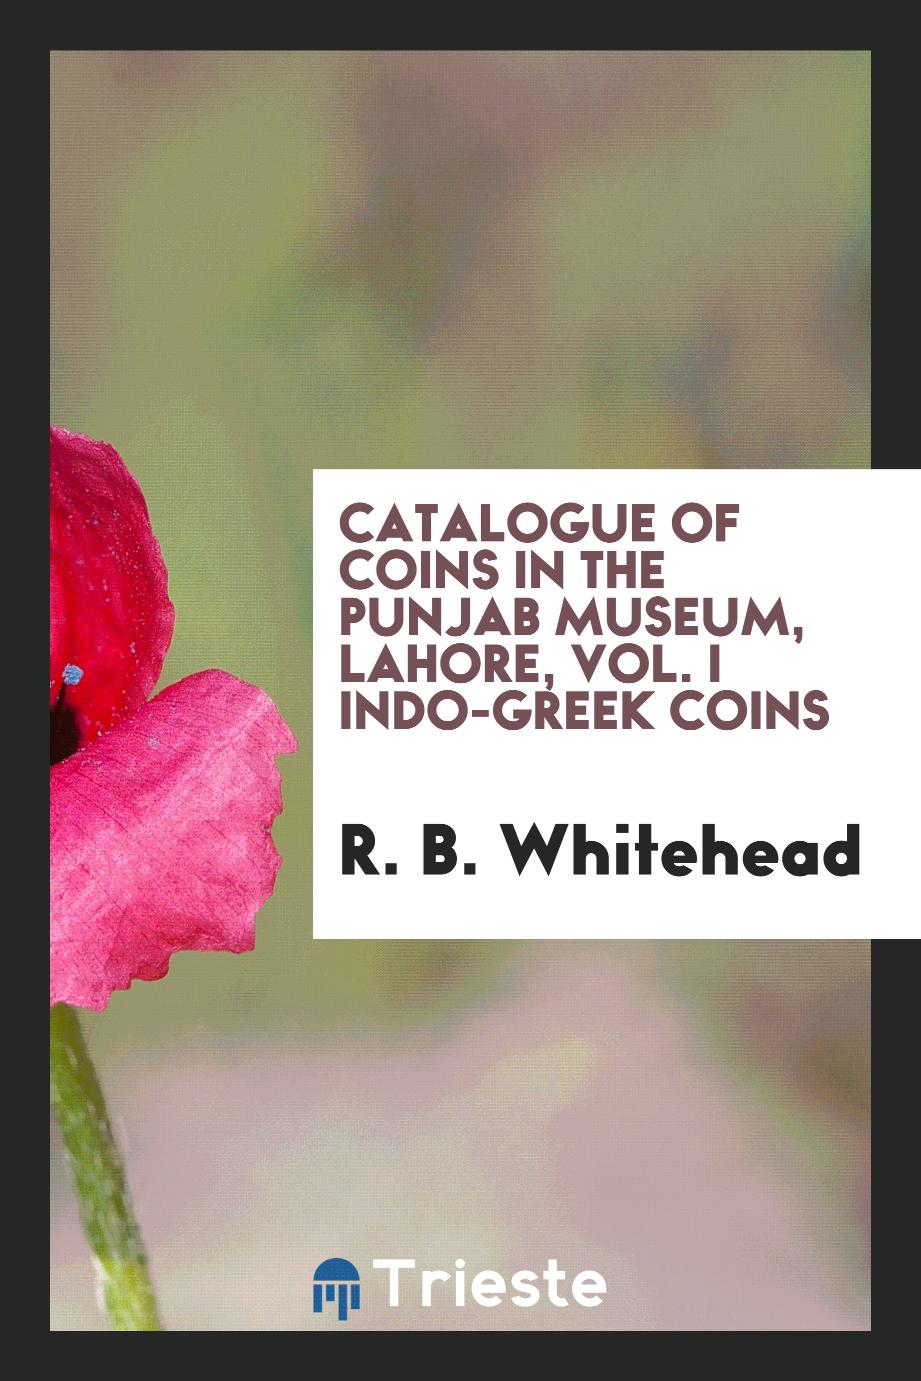 Catalogue of Coins in the Punjab Museum, Lahore, Vol. I Indo-Greek Coins